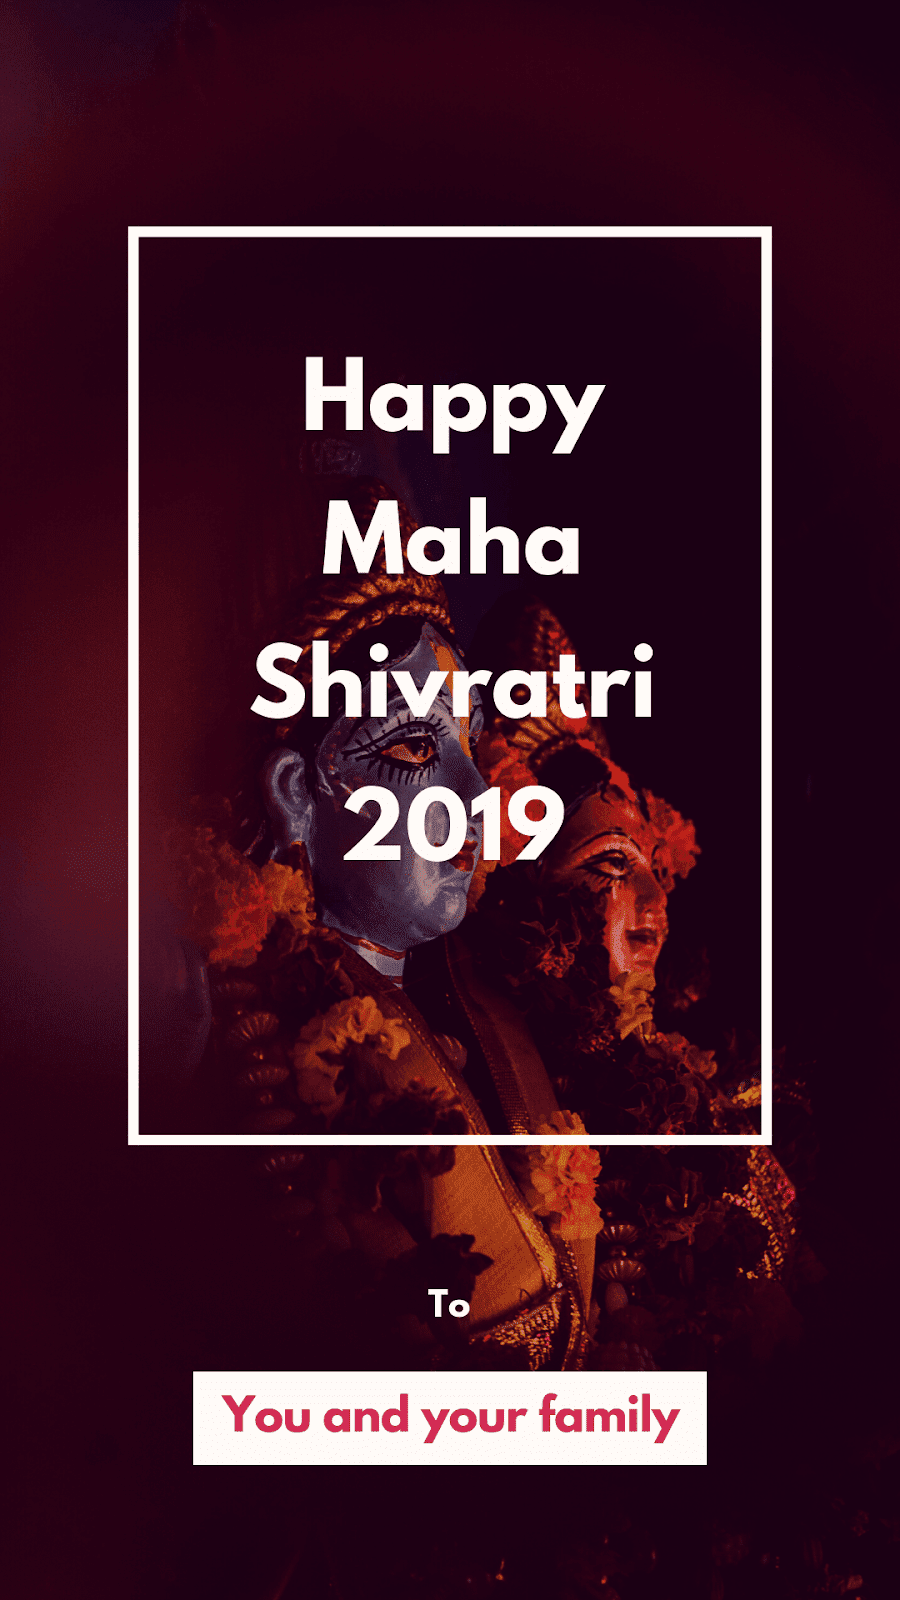 The Image That Is Shown Are Compressed Images For Webpage - Happy Maha Shivaratri 2019 , HD Wallpaper & Backgrounds